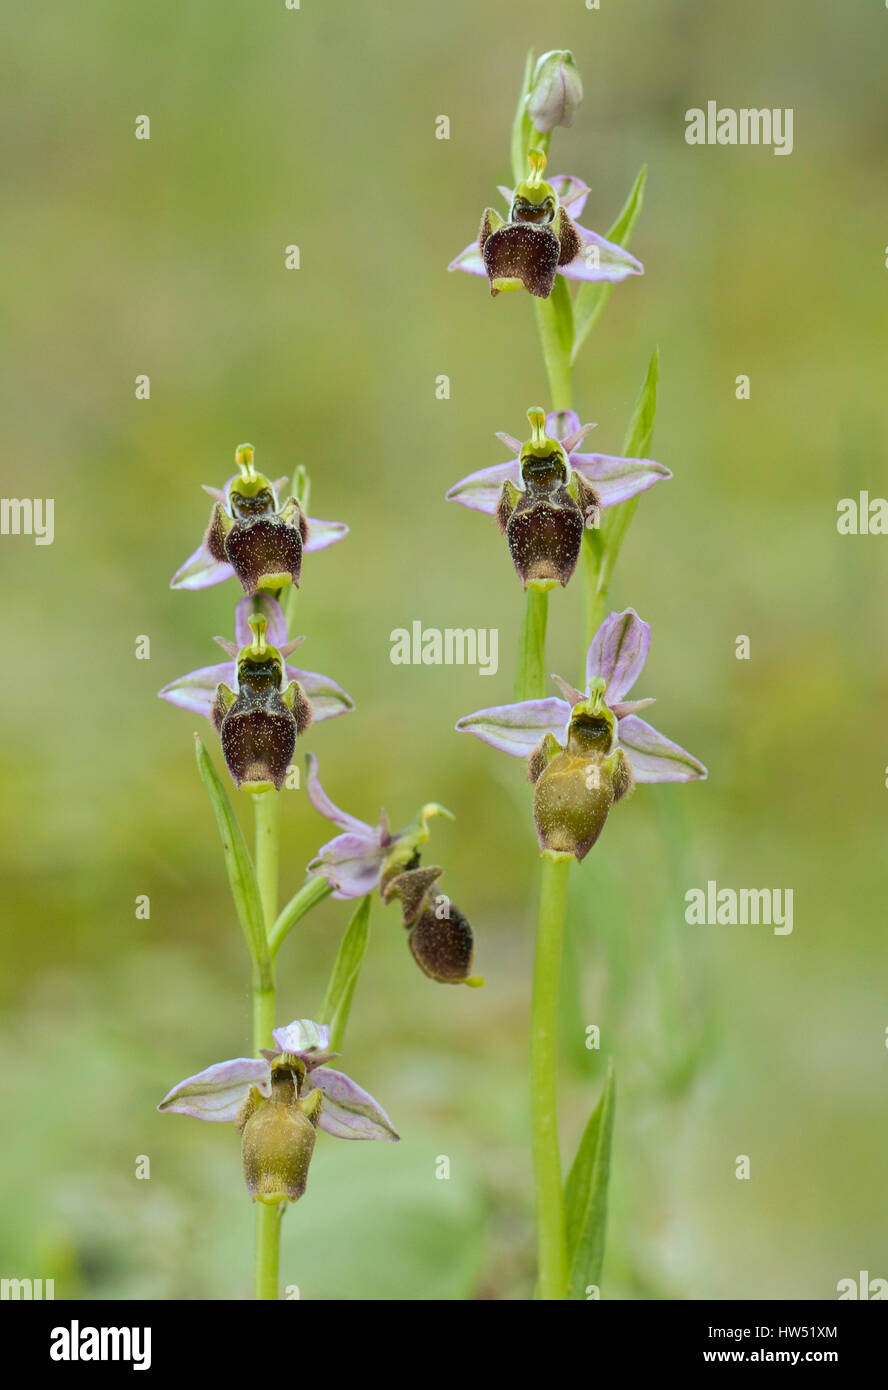 Woodcock Orchid, infiorescenza, Ophrys scolopax, orchidea selvatica, Andalusia, Spagna Foto Stock